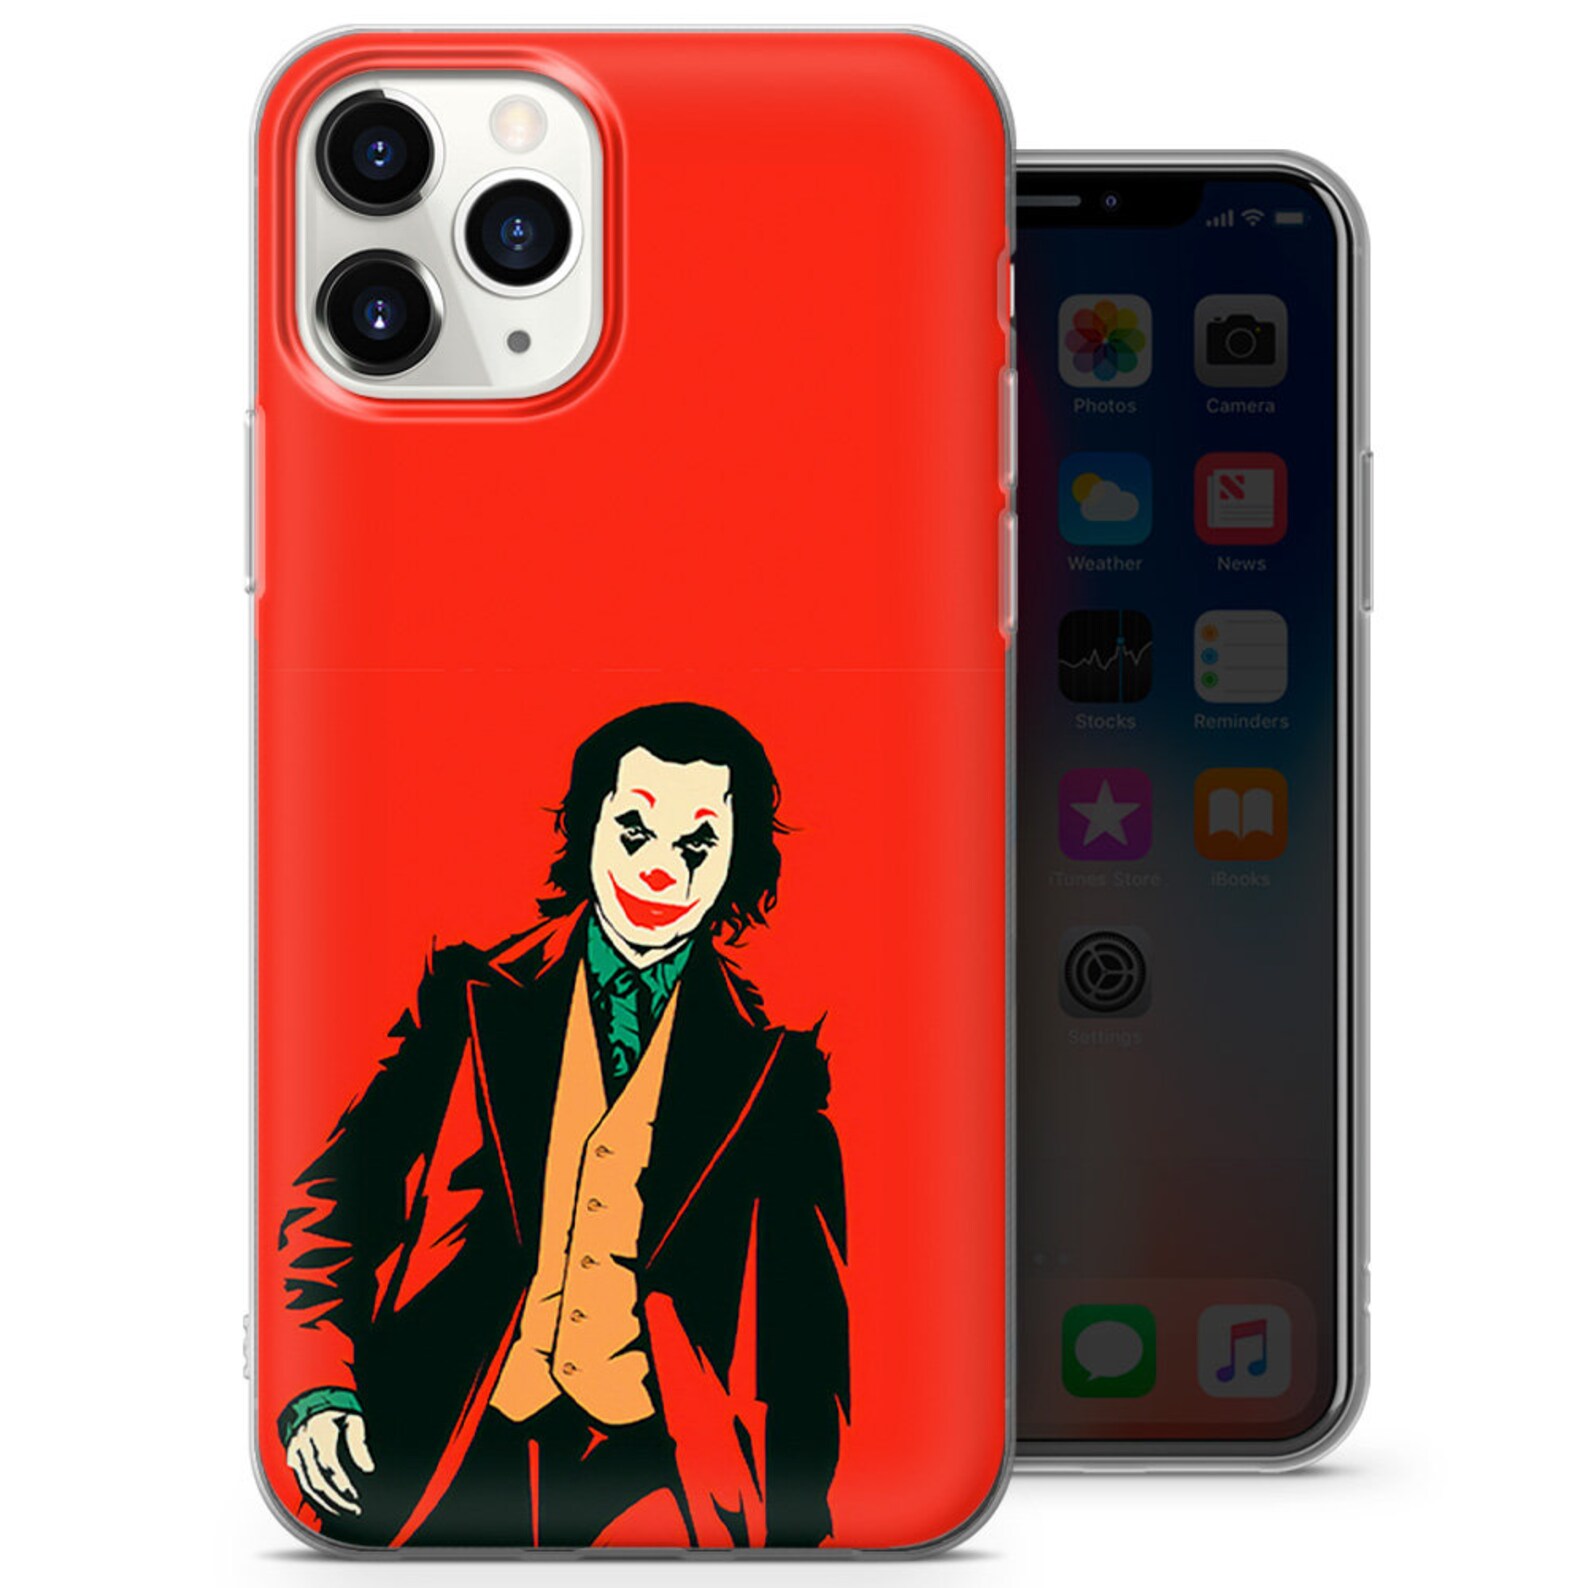 Joker Phone Case for iPhone 7 8 XS XR 11 12 Pro Max 12 | Etsy